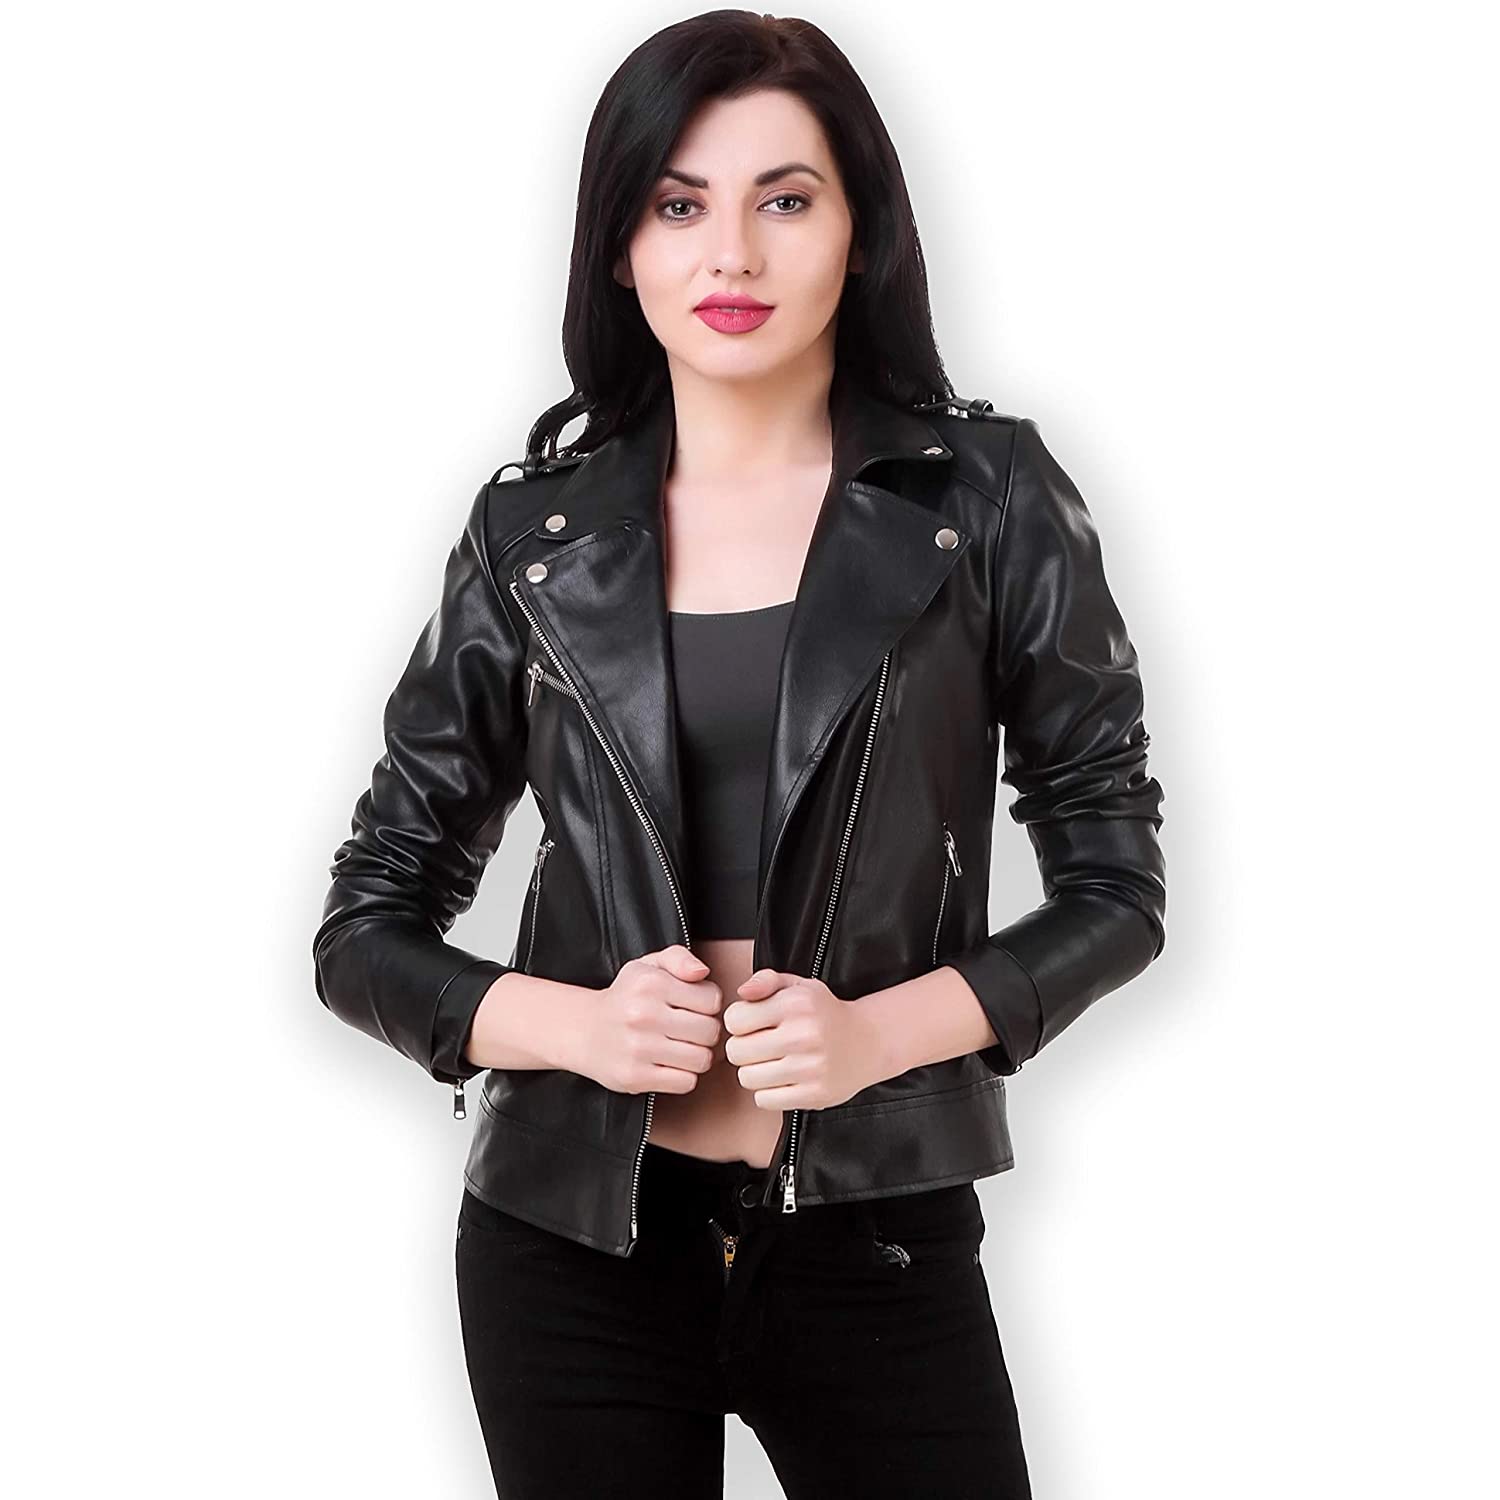 7 of The Best Leather Jackets For Women On Amazon